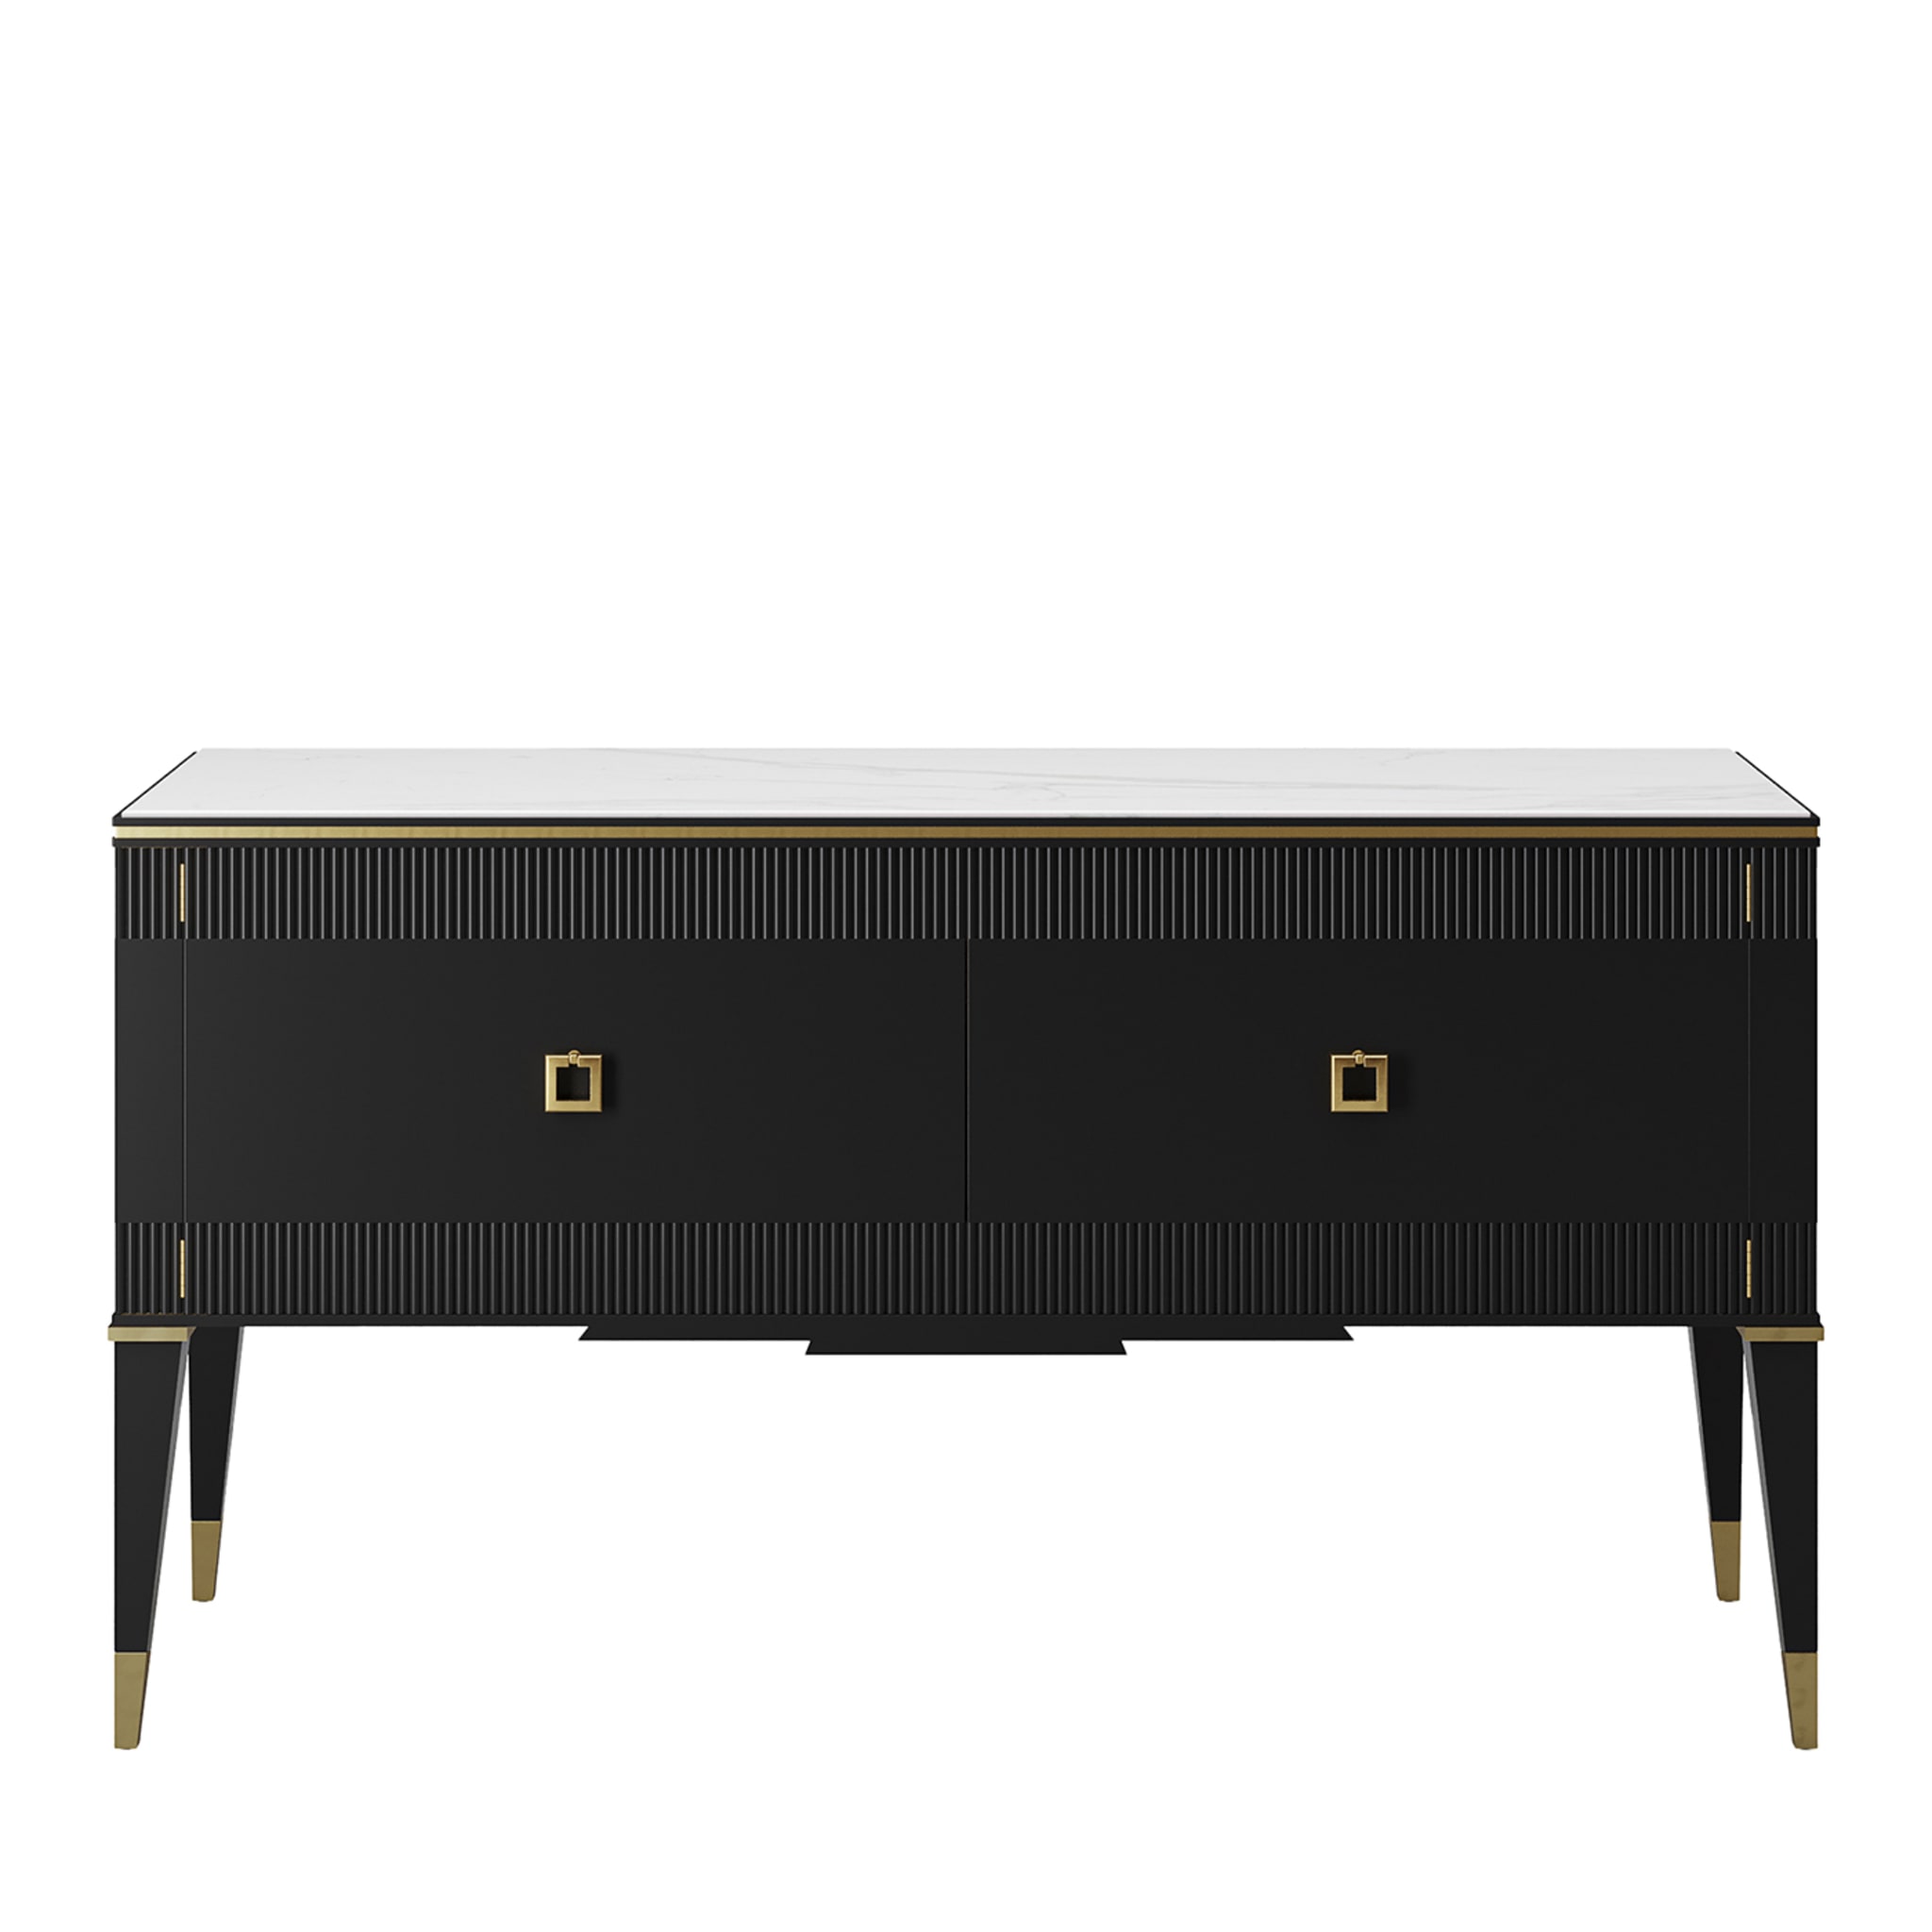 Thousand Lines Deco Black Sideboard - Main view